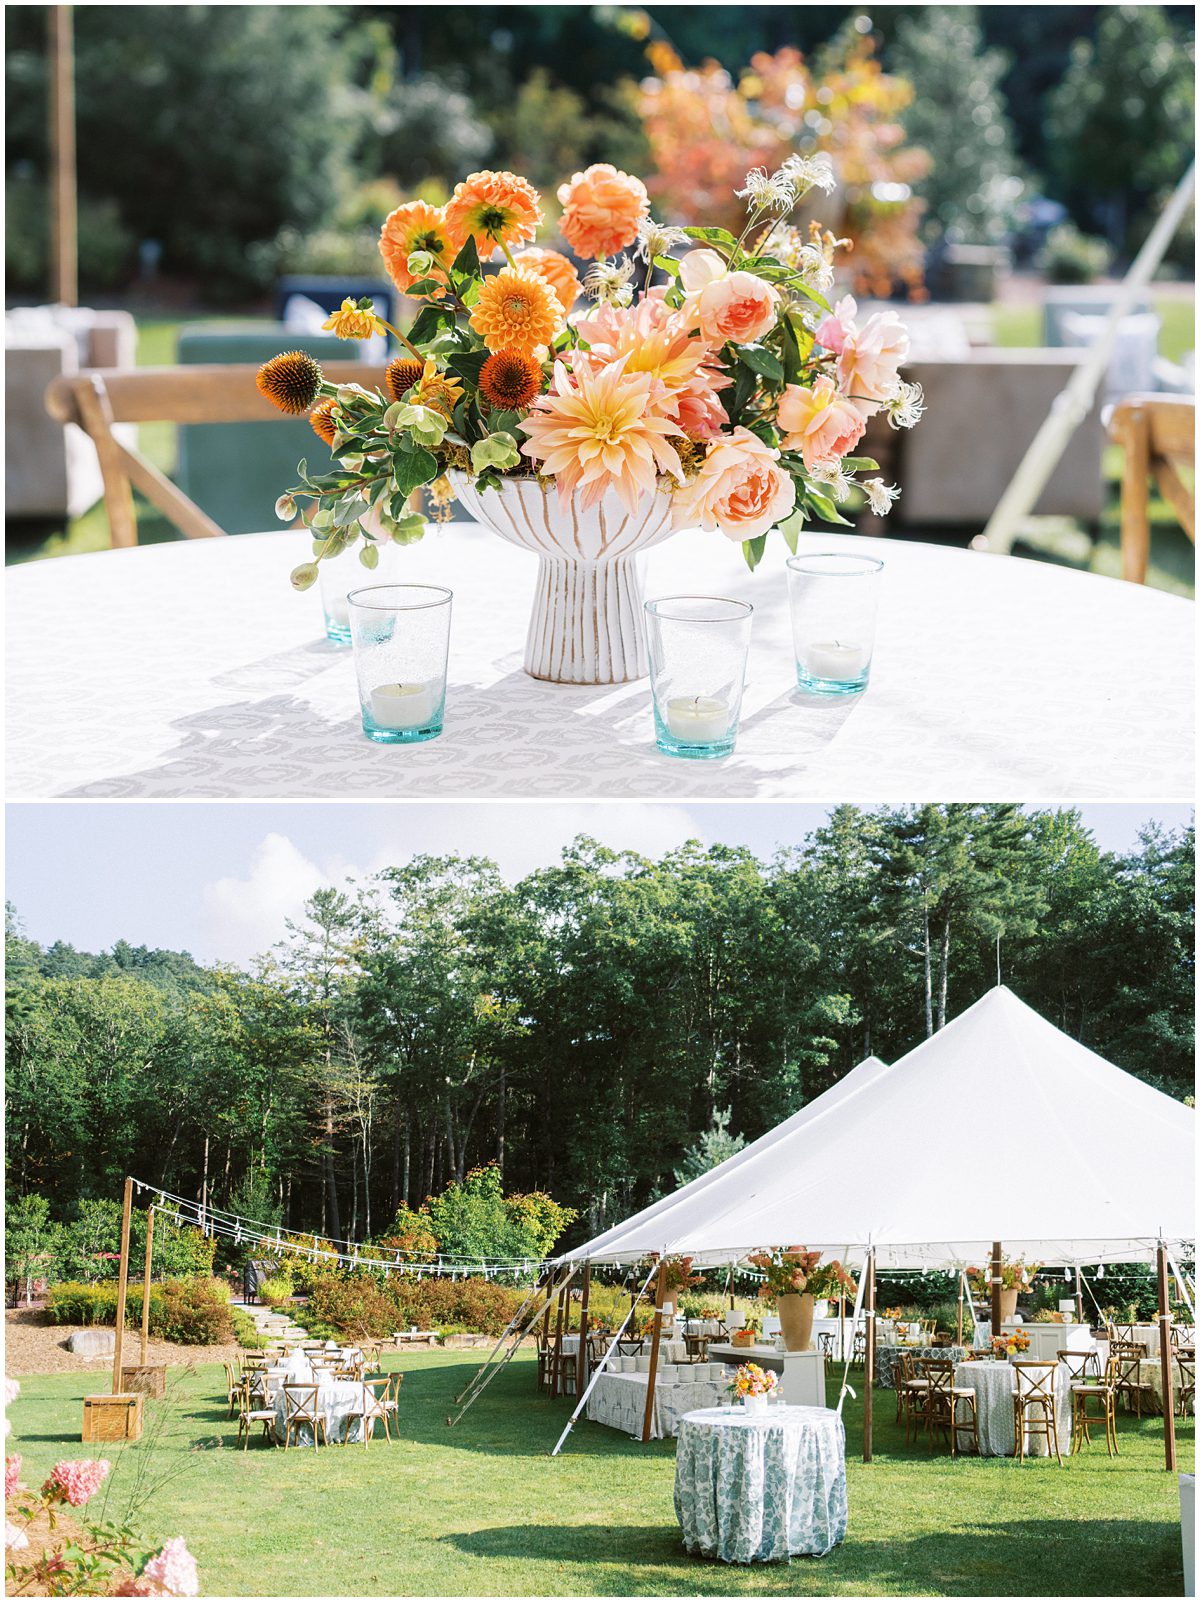 The lush greenery and pink and orange floral accents of the reception tent designed by Tailor and Table bring the outdoors in, creating a magical atmosphere